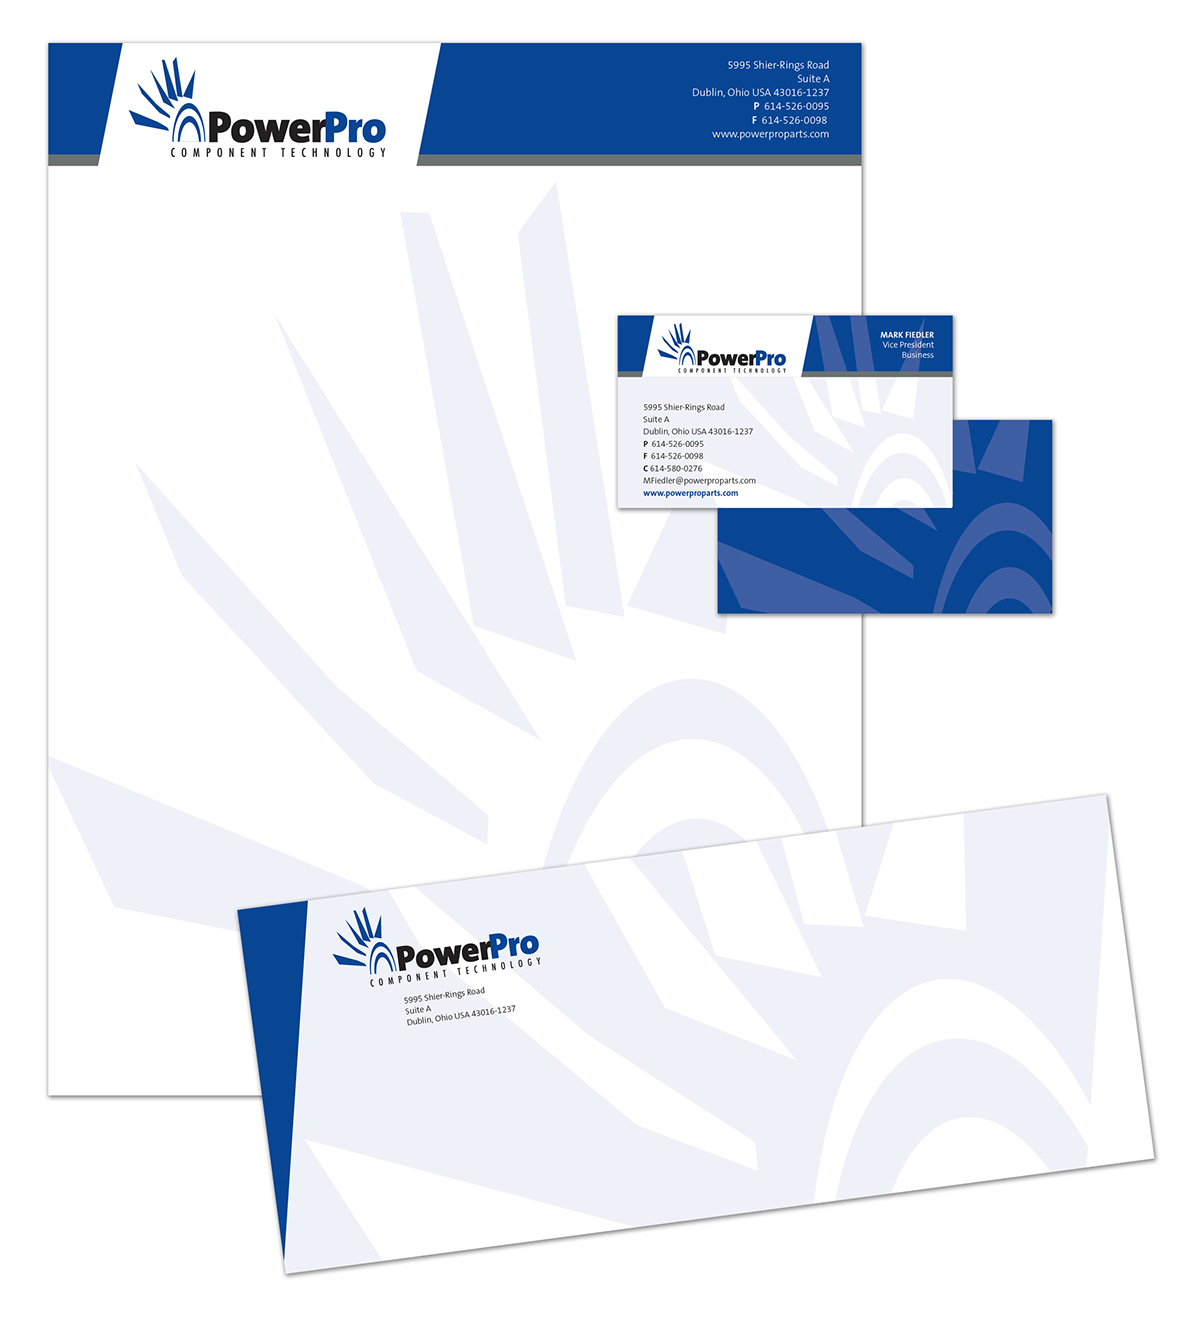 annual reports brochures Logo Design Website Design digital design promotional items expo collateral Corporate Identity invitations Fliers Programs booklets training materials newsletters ads